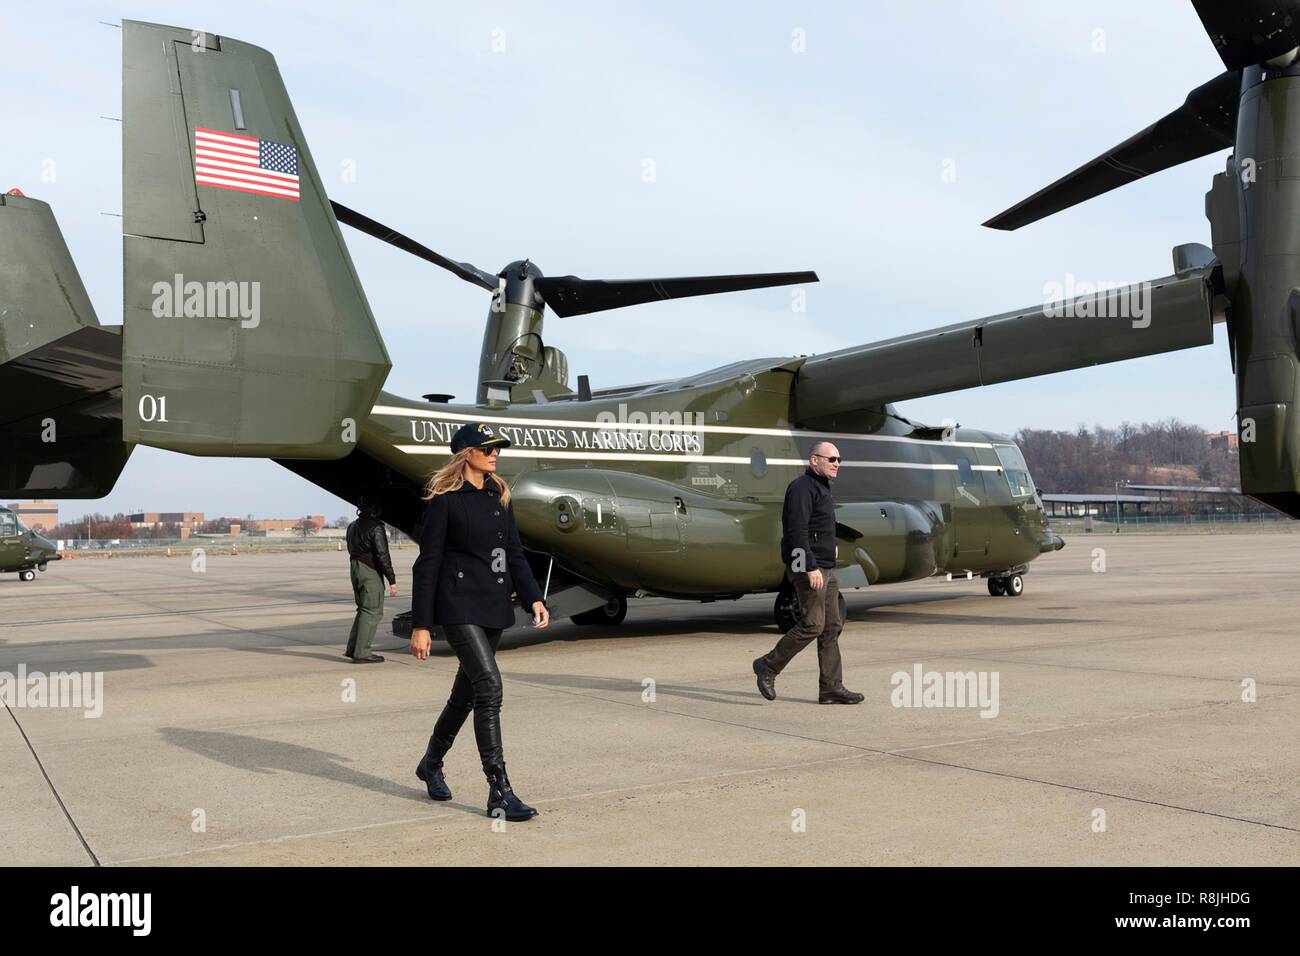 U.S. First Lady Melania Trump wearing a USS George H.W. Bush ball cap hat steps off a Marine Corps V-22 Osprey aircraft at Joint Base Andrews following a holiday visit to the aircraft carrier December 12, 2018 in Andrews, Maryland. Stock Photo